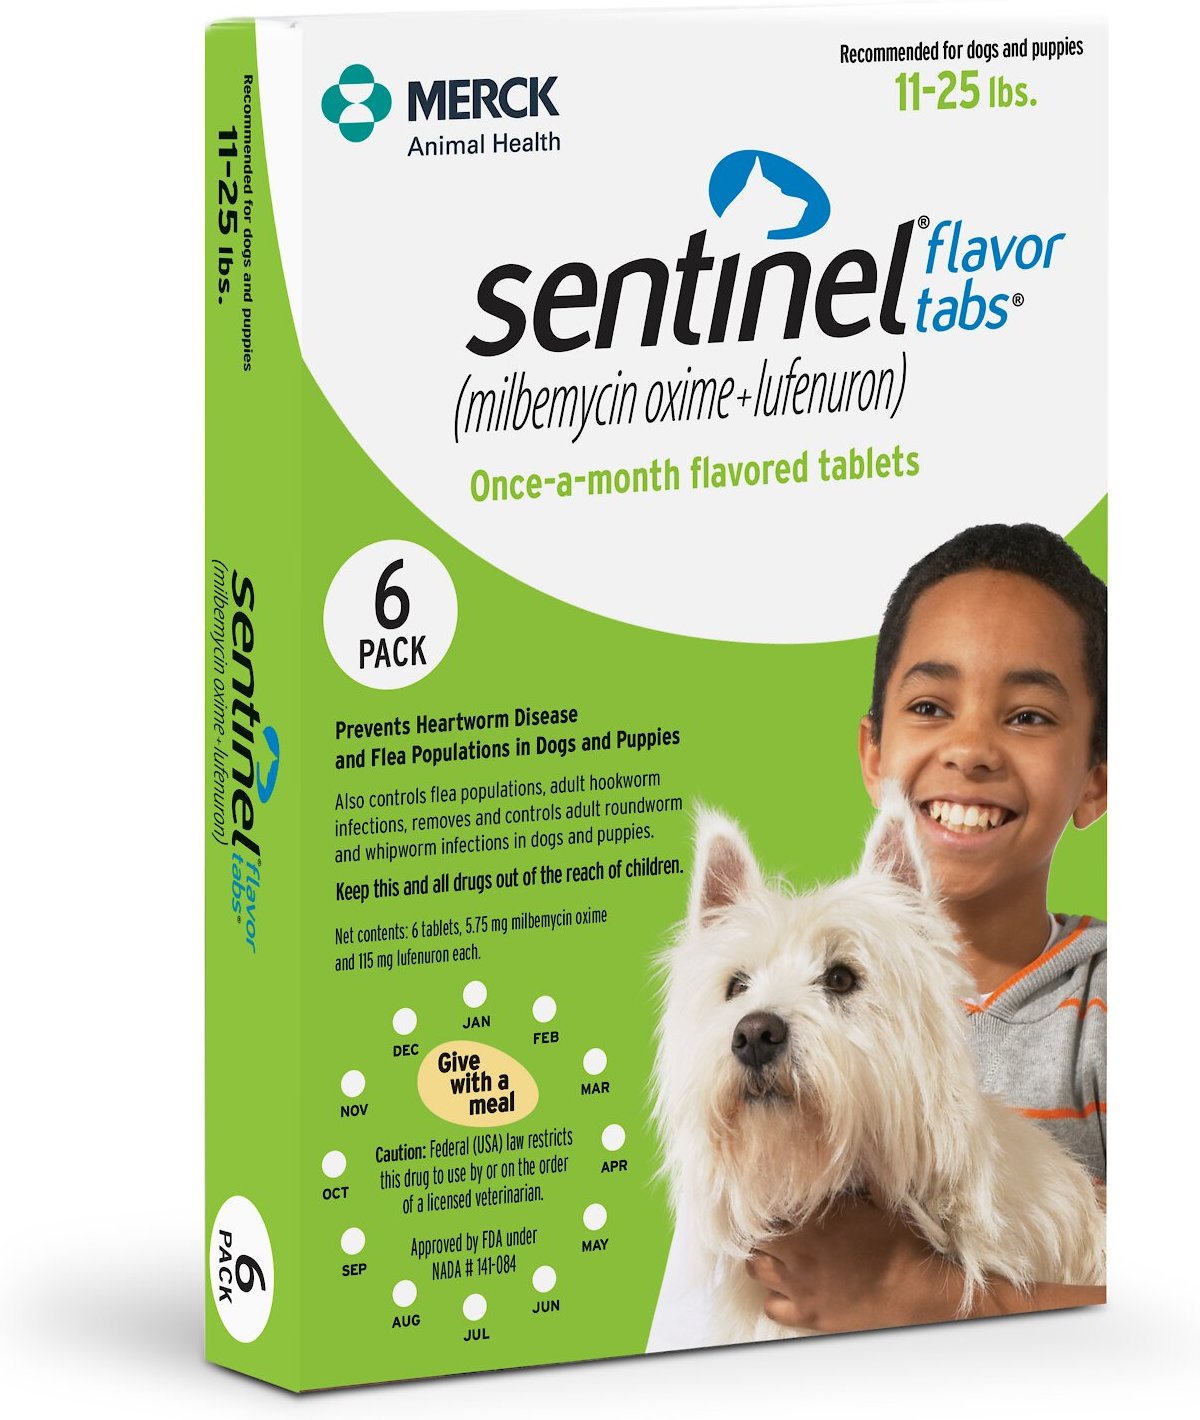 heartworm and flea tablets for dogs